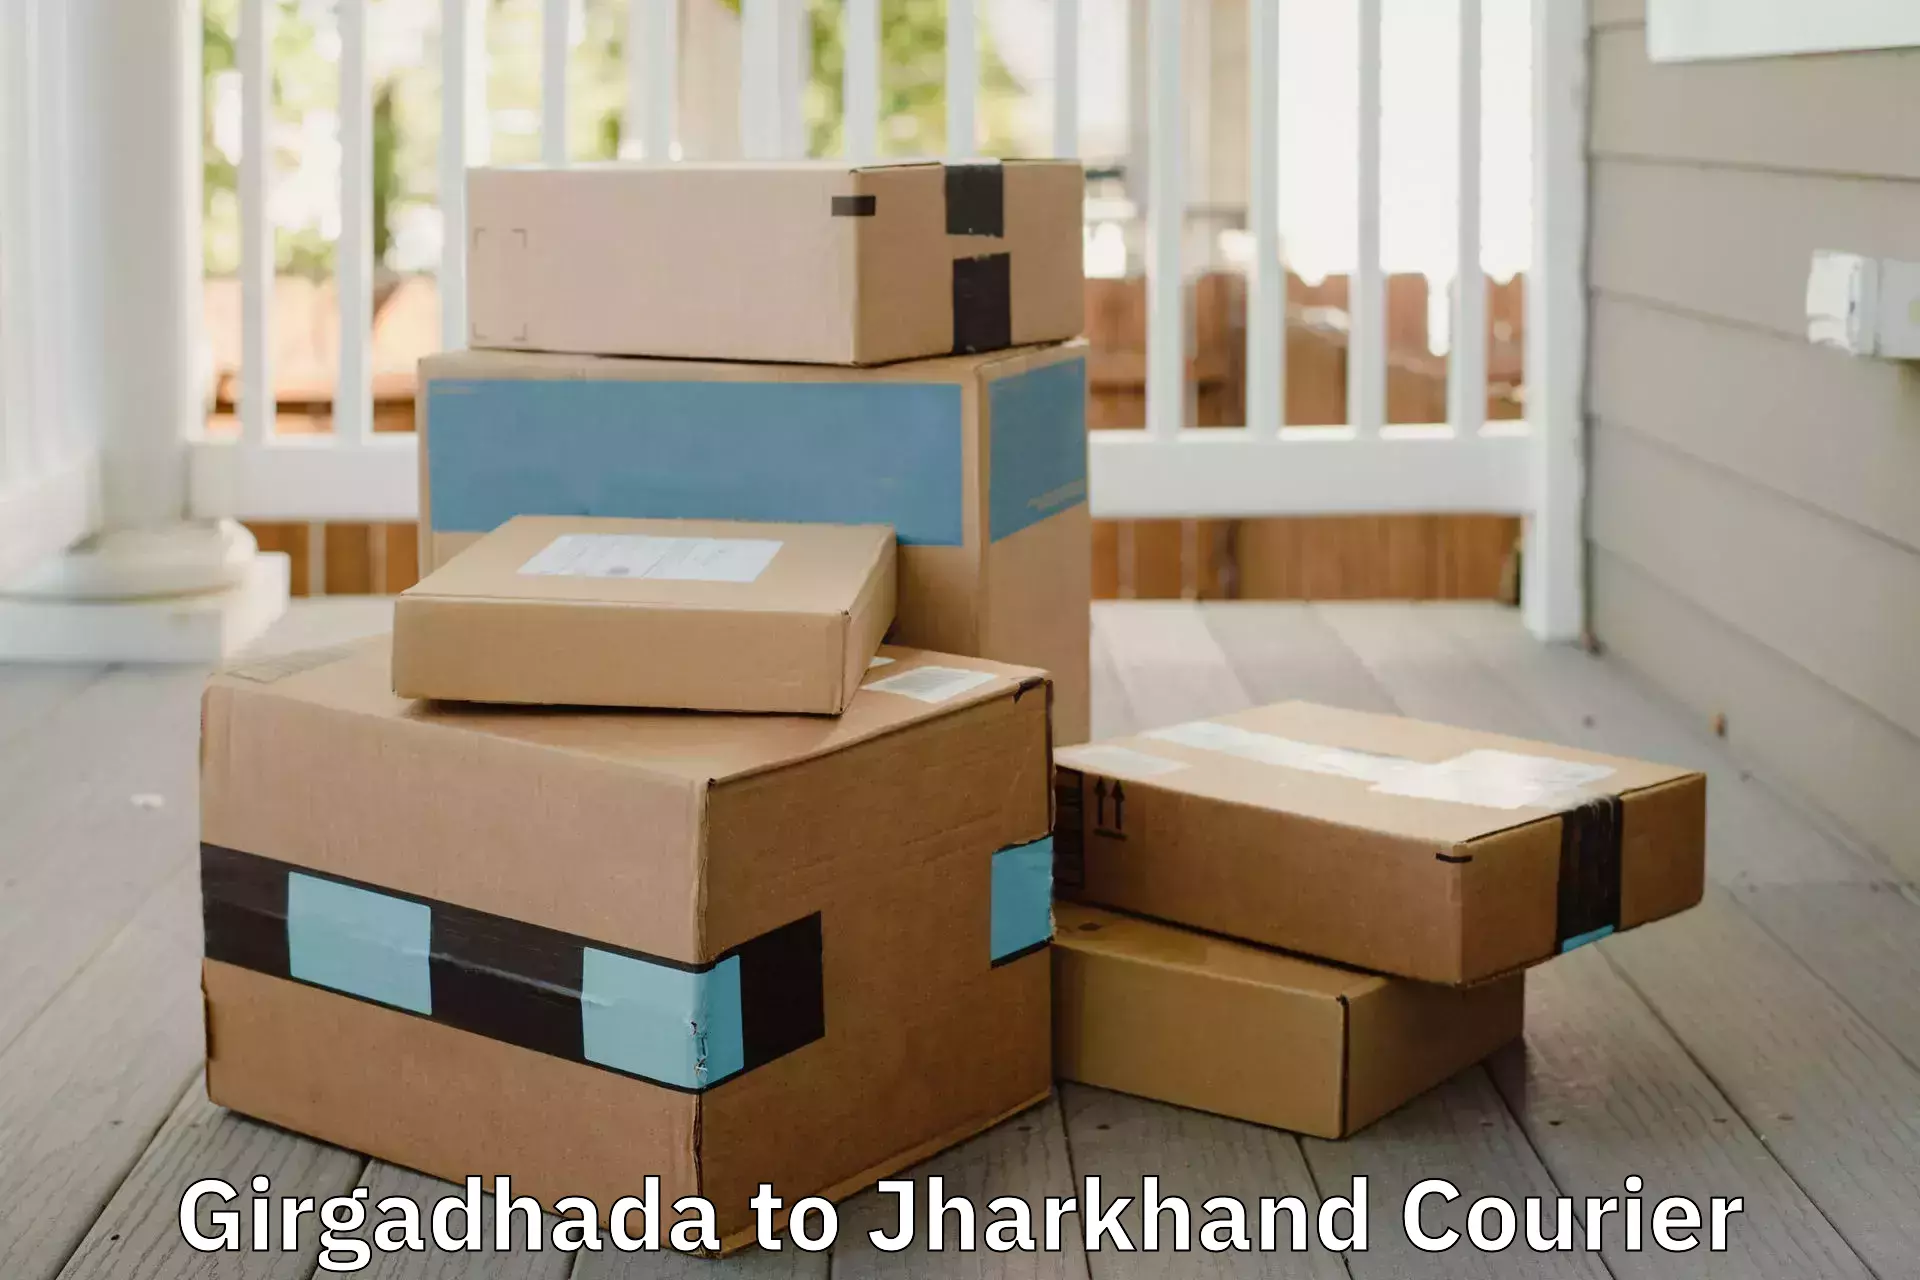 Budget-friendly moving services in Girgadhada to Koderma